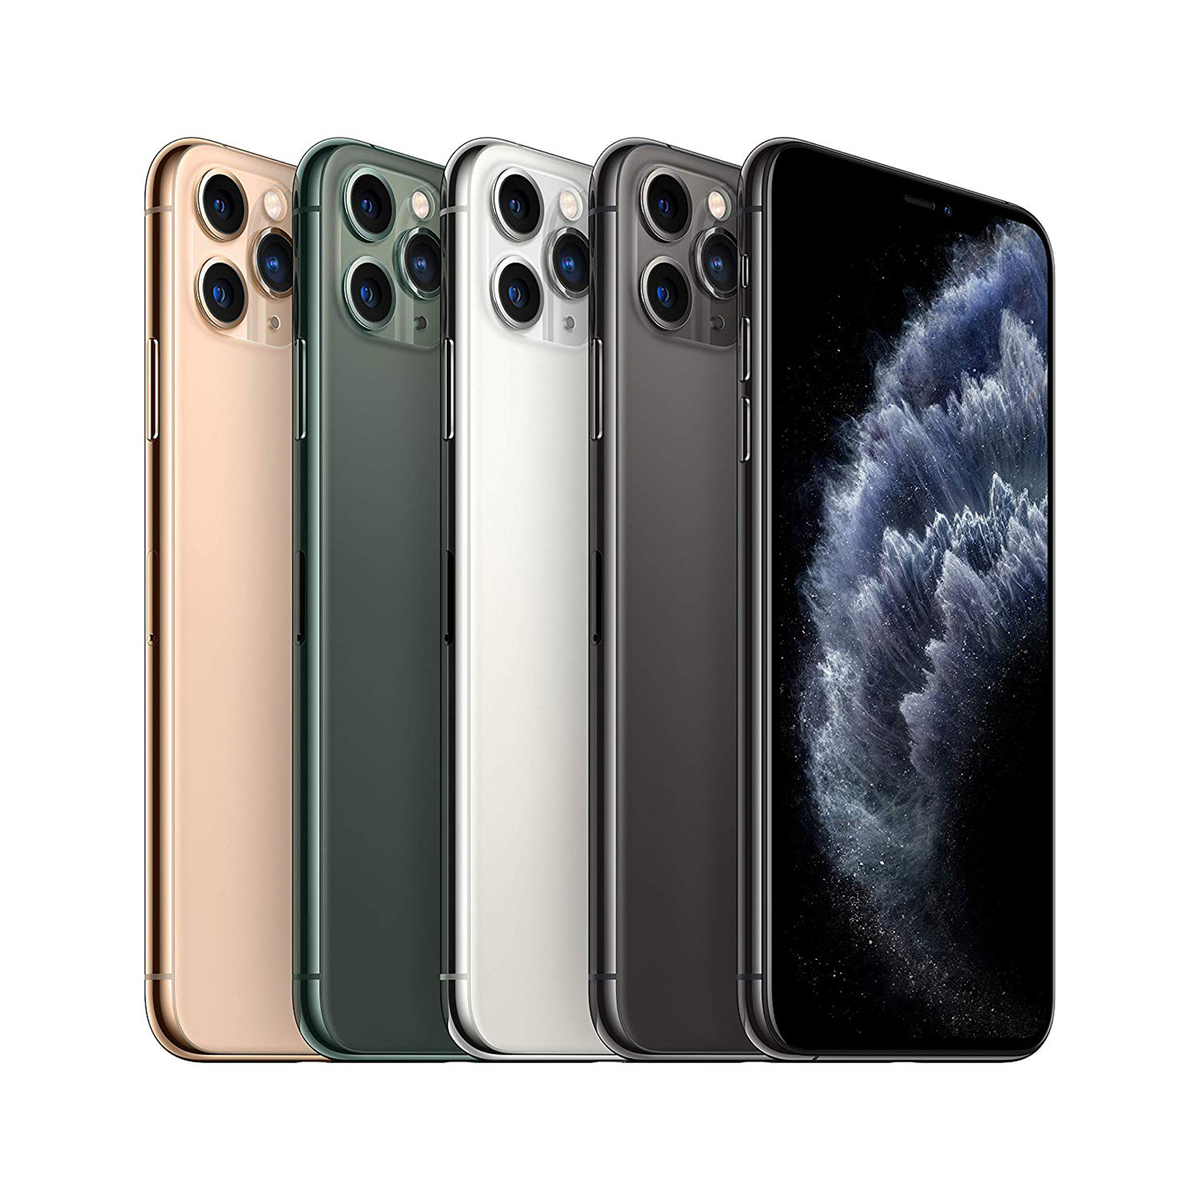 Apple iPhone 11 Pro Max 256GB Silver Online at Best Price | Smart